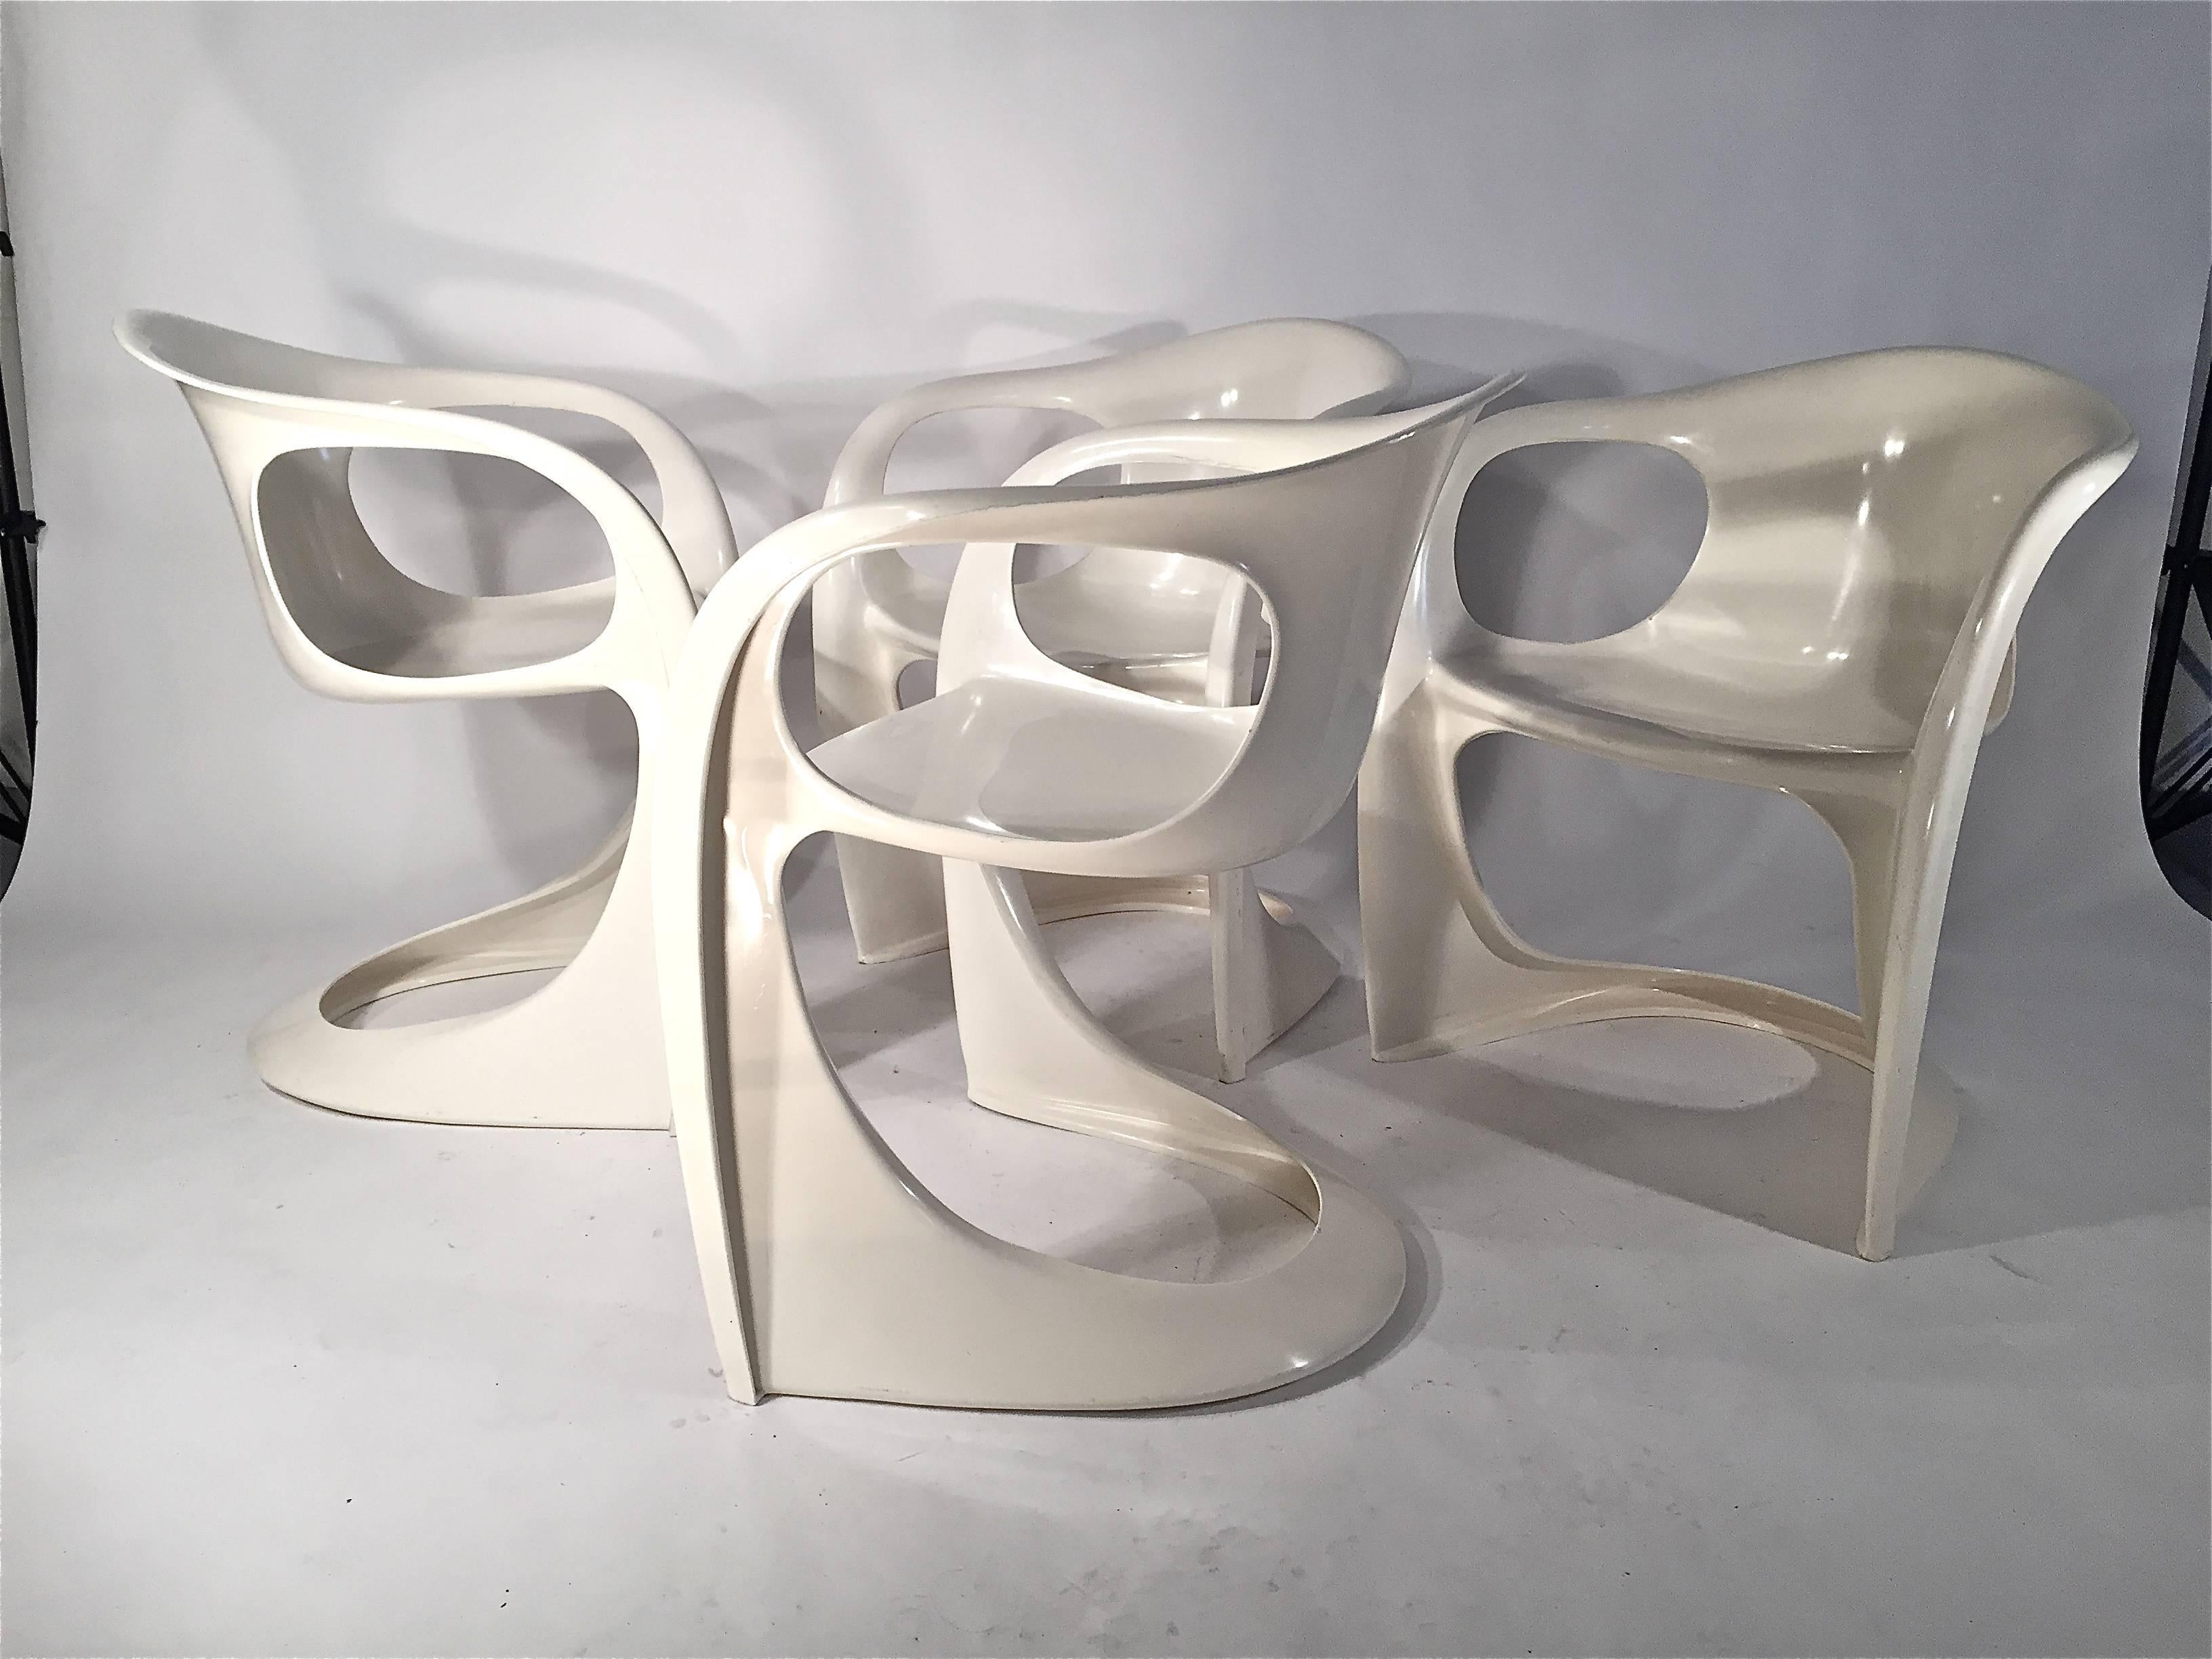 Casalino armchairs designed by Alexander Begge for Casala, Made of molded white plastic. Western Germany, 1970s.